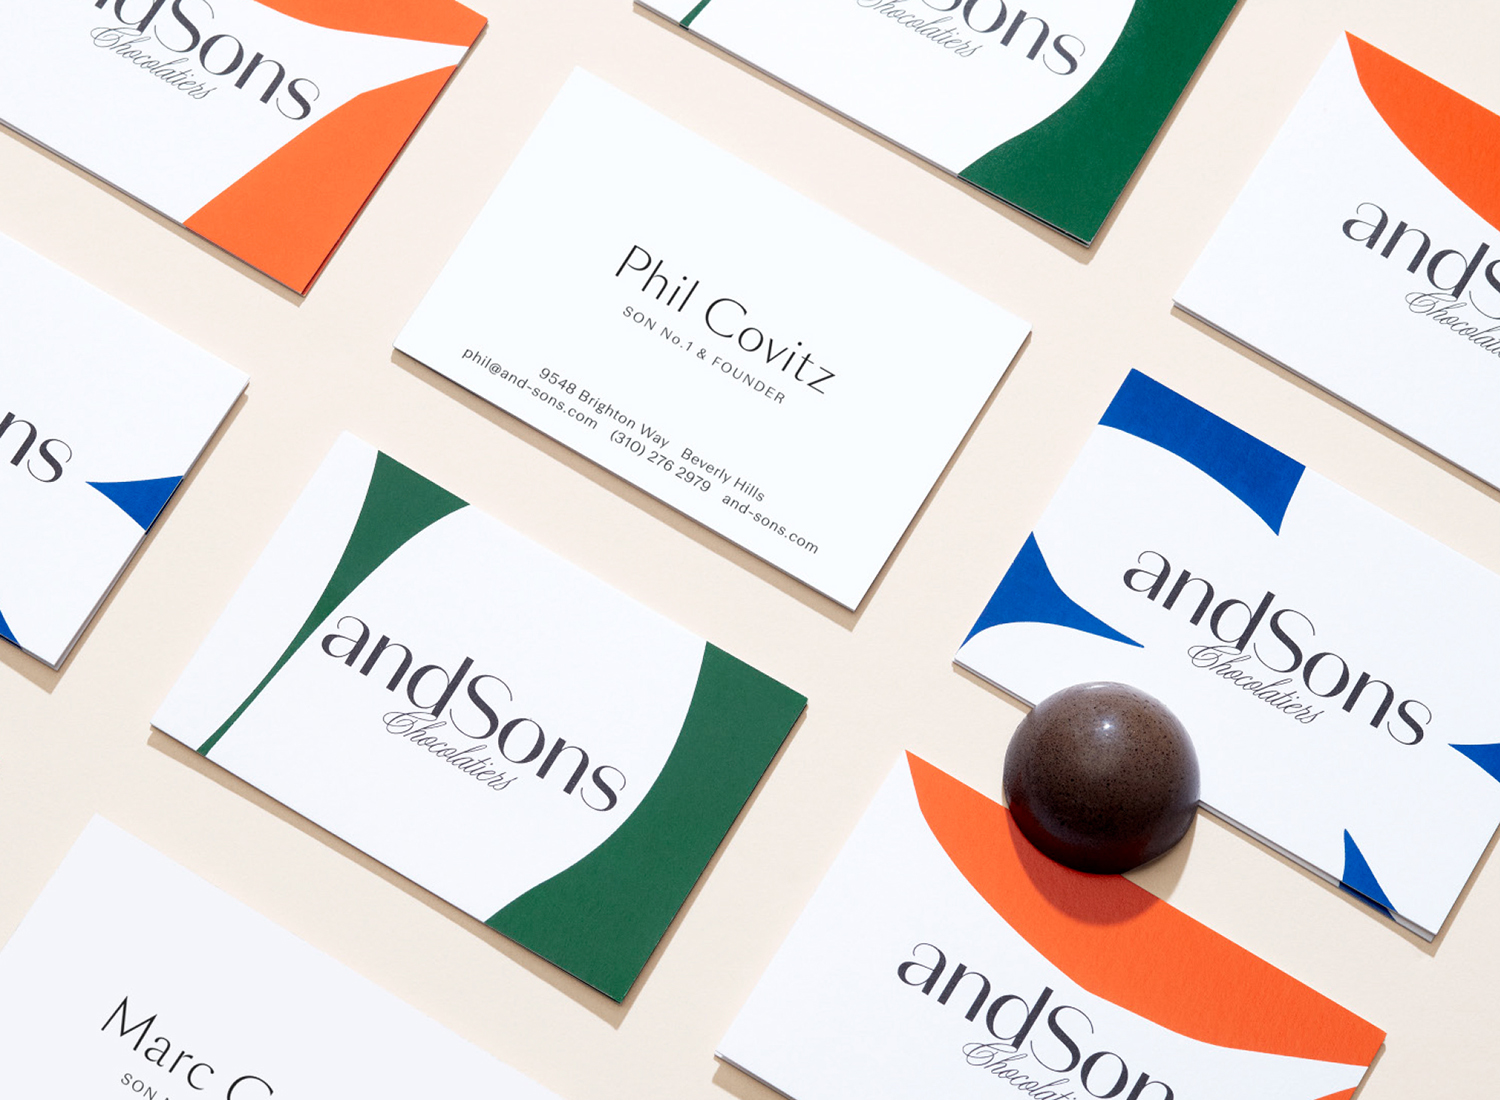 Creative Business Cards – andSons Chocolatiers by Base Design